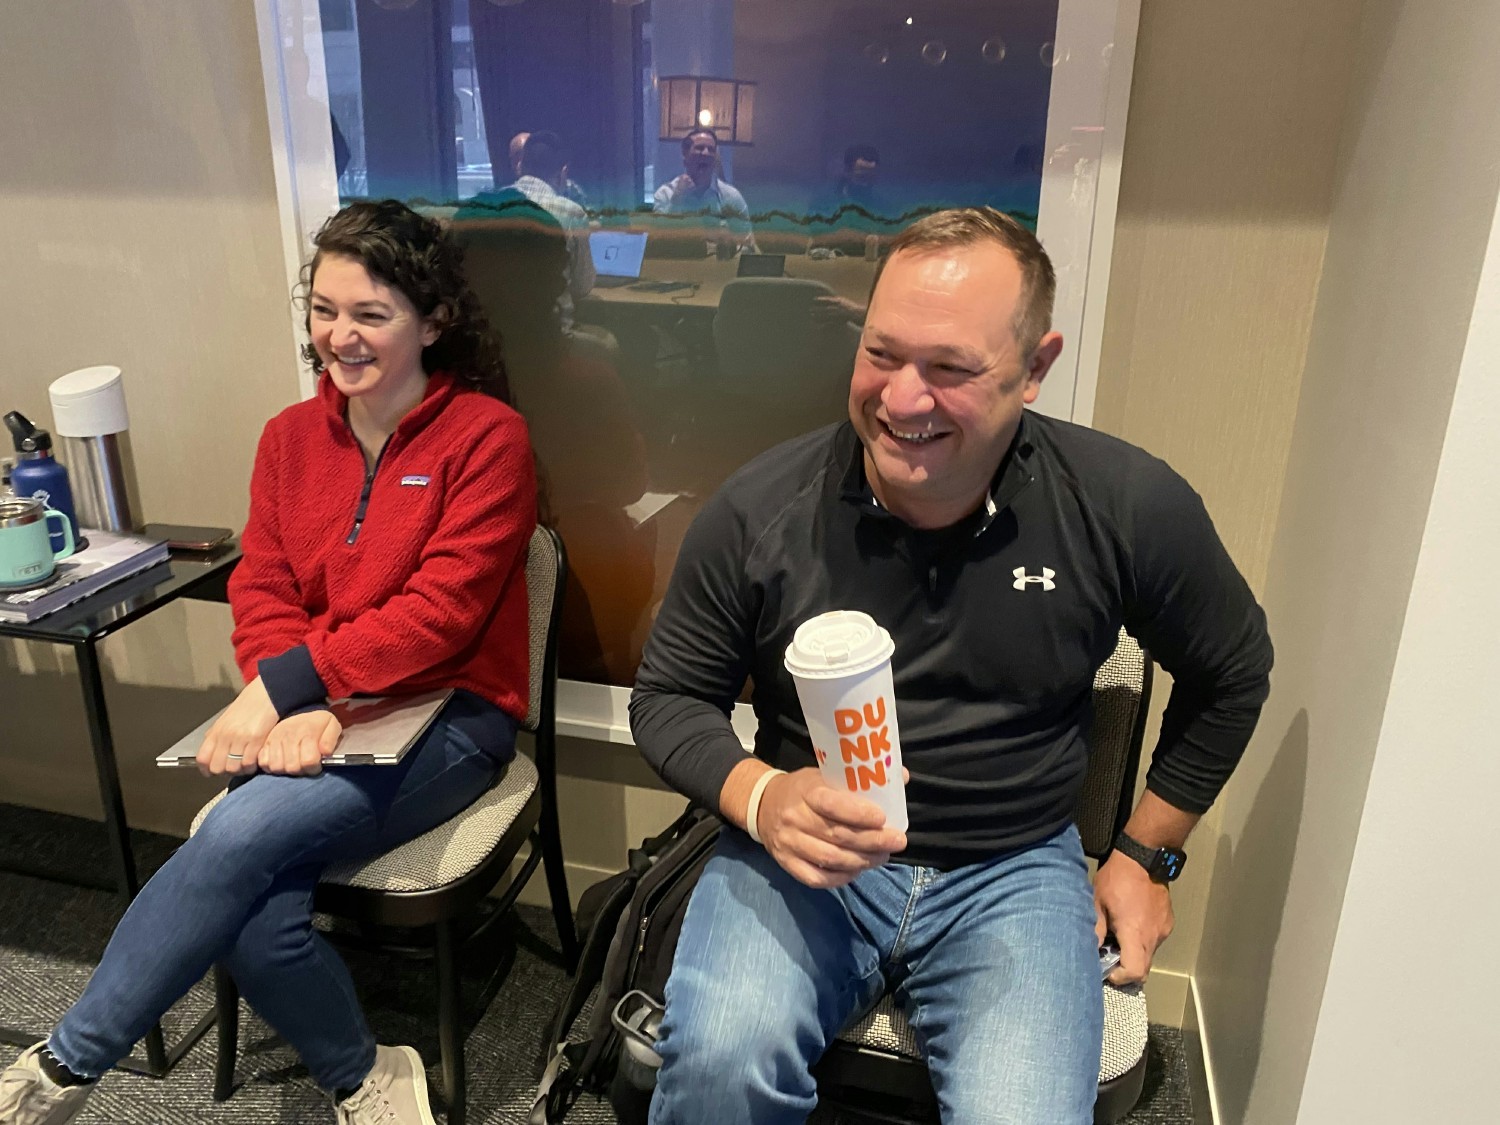 Two members of the Sprocket Sports Technology Team have fun during a meeting while staying caffeinated.